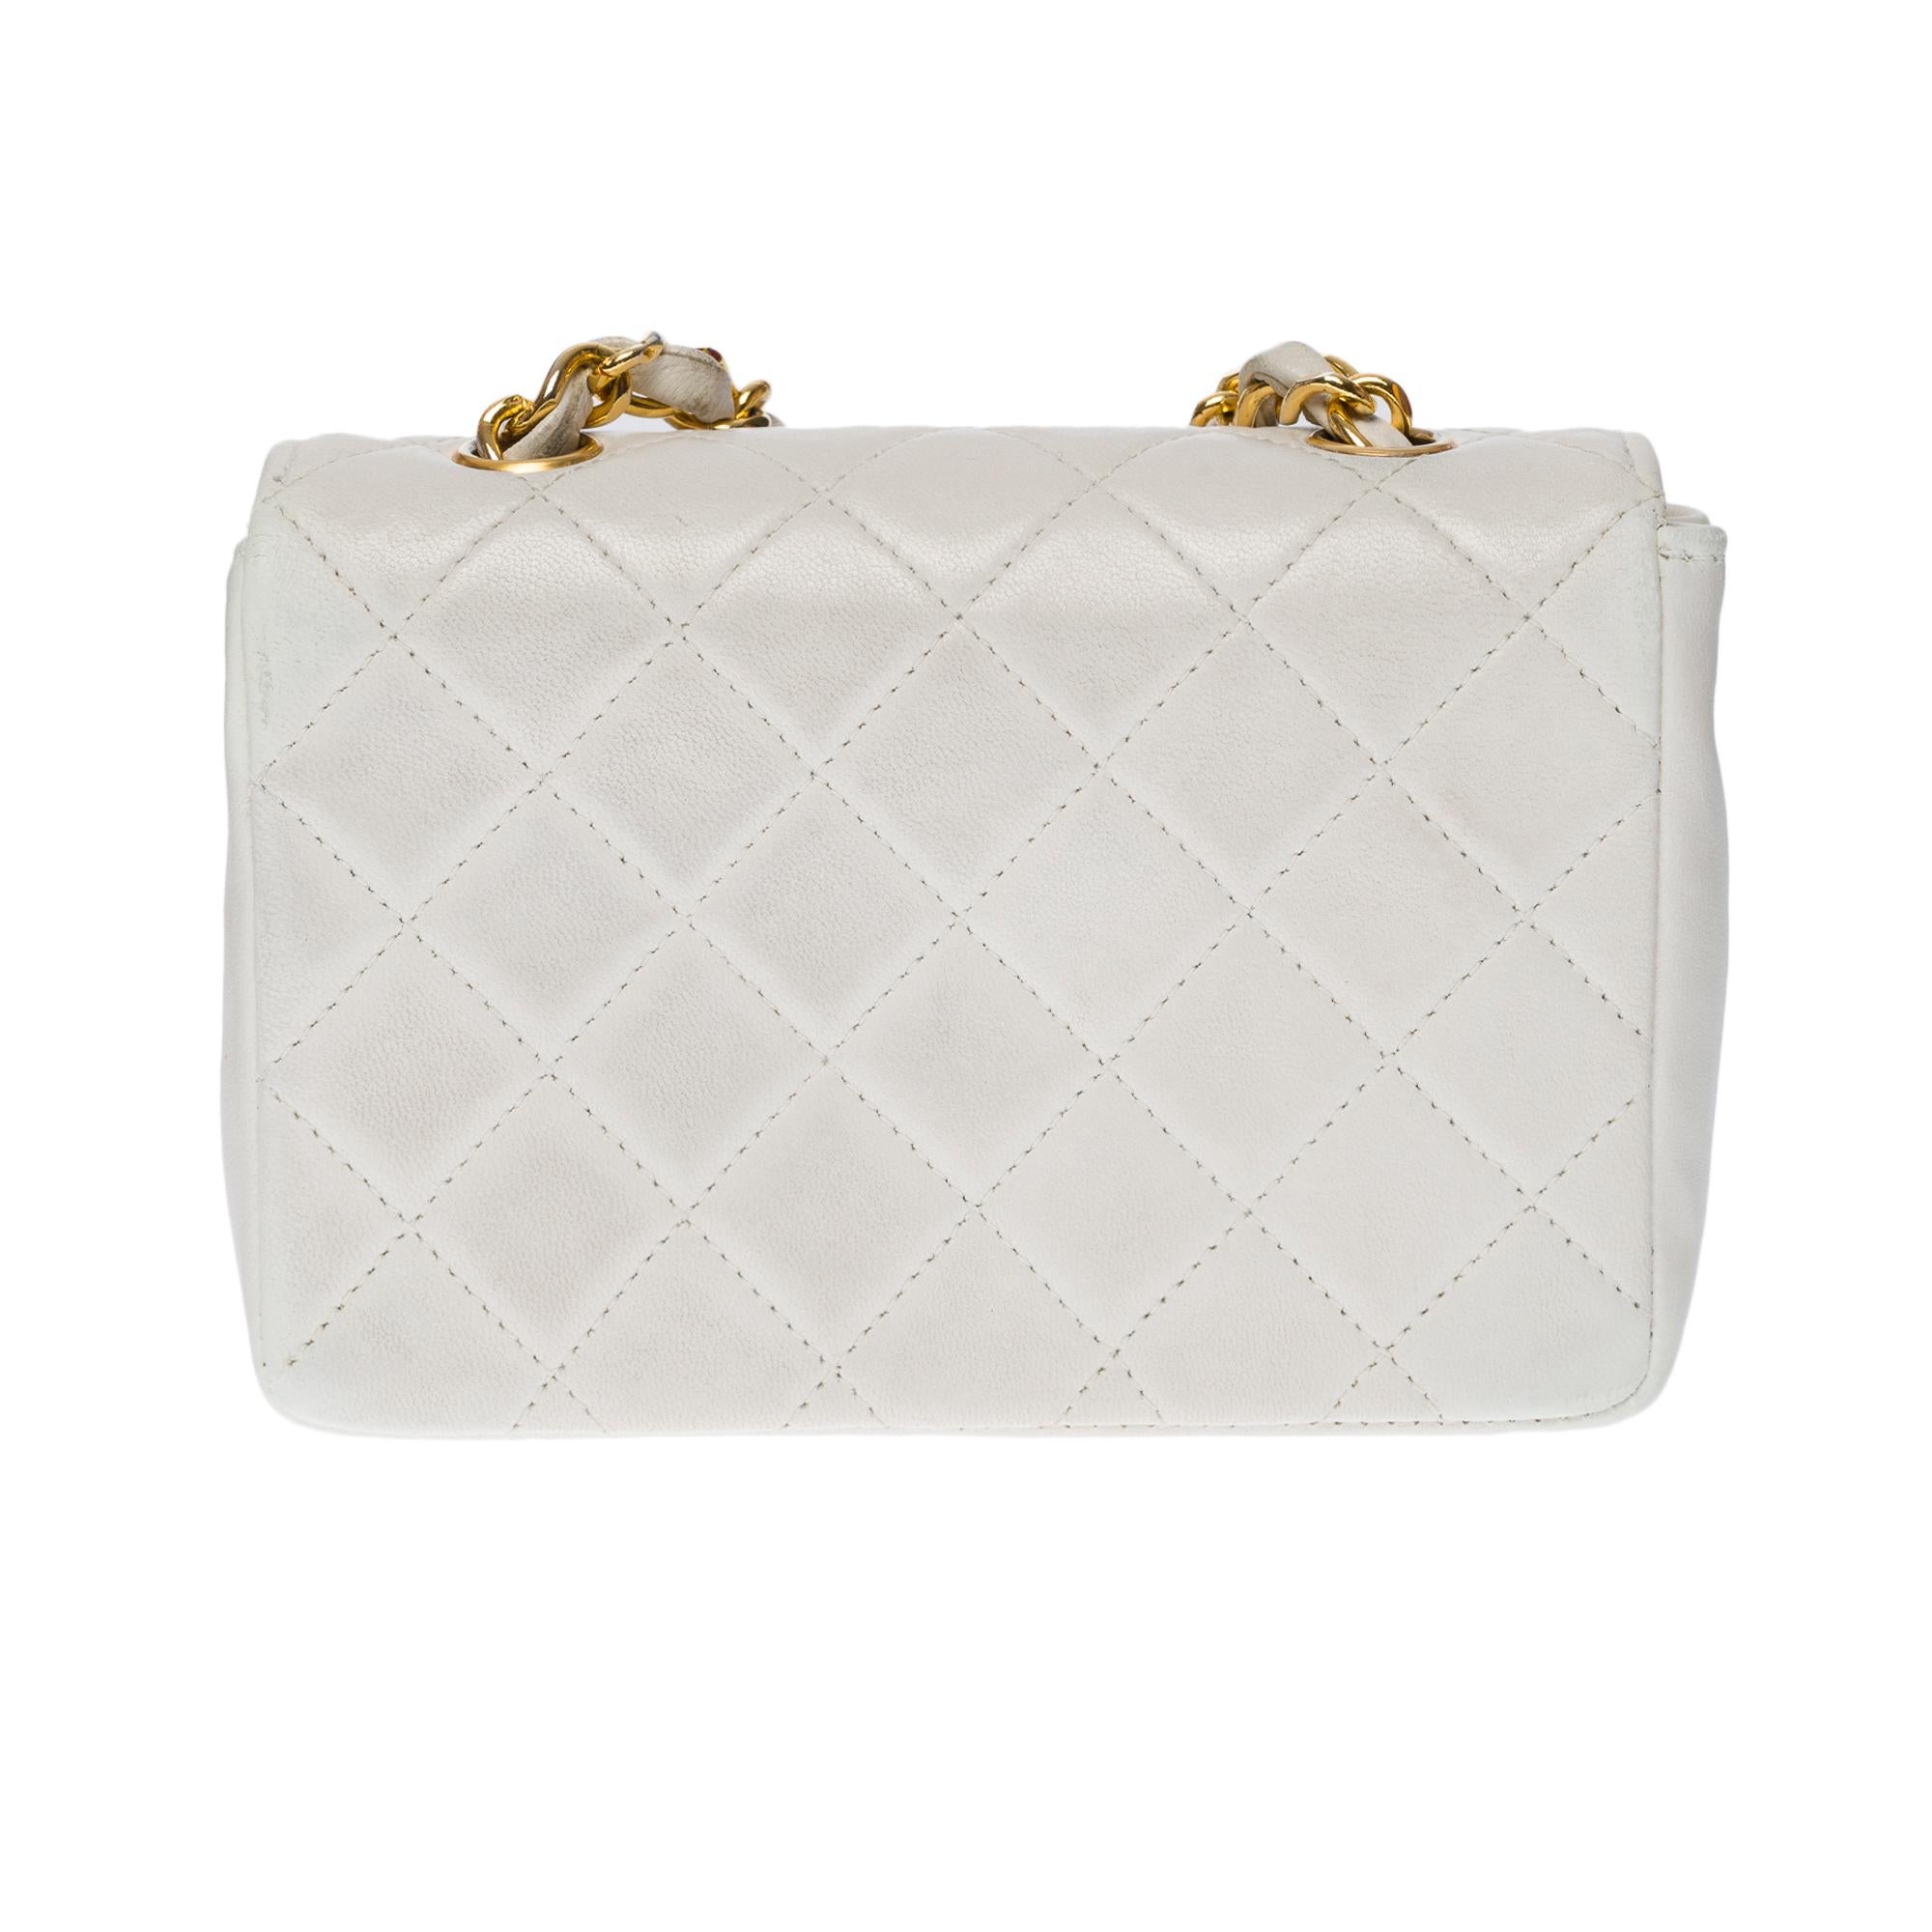 Gorgeous and highly sought after vintage Mini Chanel Classic shoulder flap bag in white quilted lambskin leather, gold metal hardware, white leather interlaced gold metal chain for shoulder and shoulder strap carry

Flap closure
White leather inner